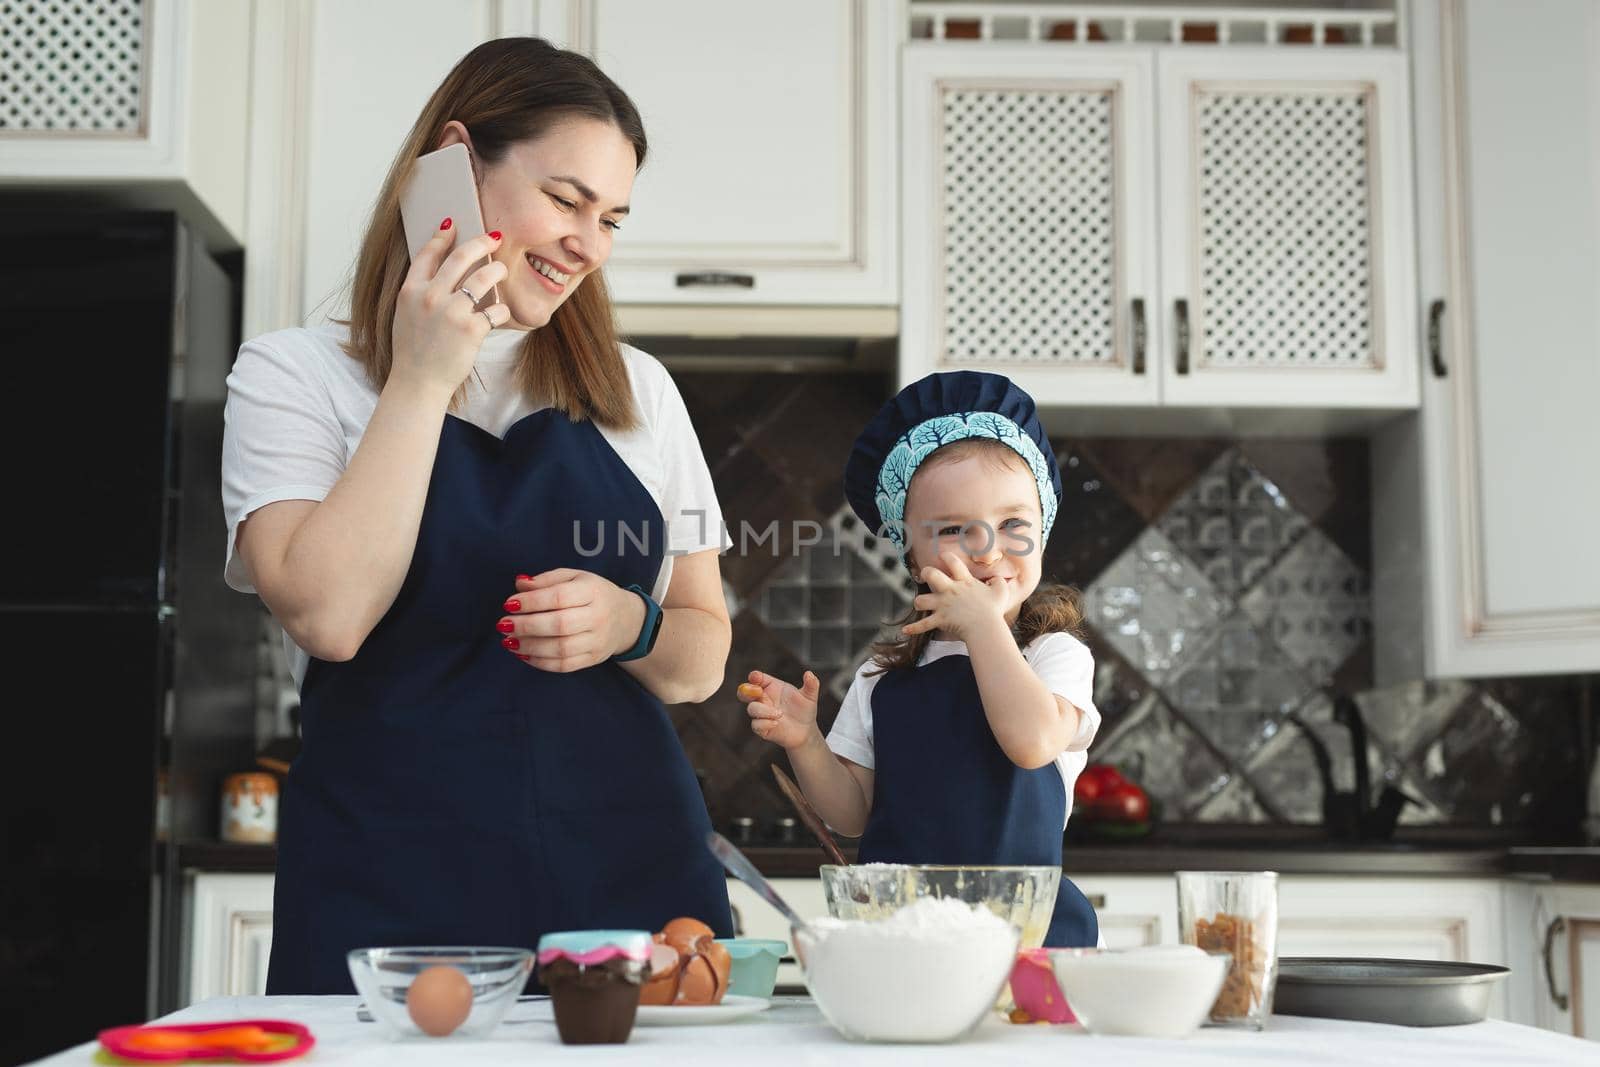 A mother and daughter in identical aprons and chef's hats are cooking in the kitchen, smiling and looking at the camera. Mom's on the phone by StudioPeace